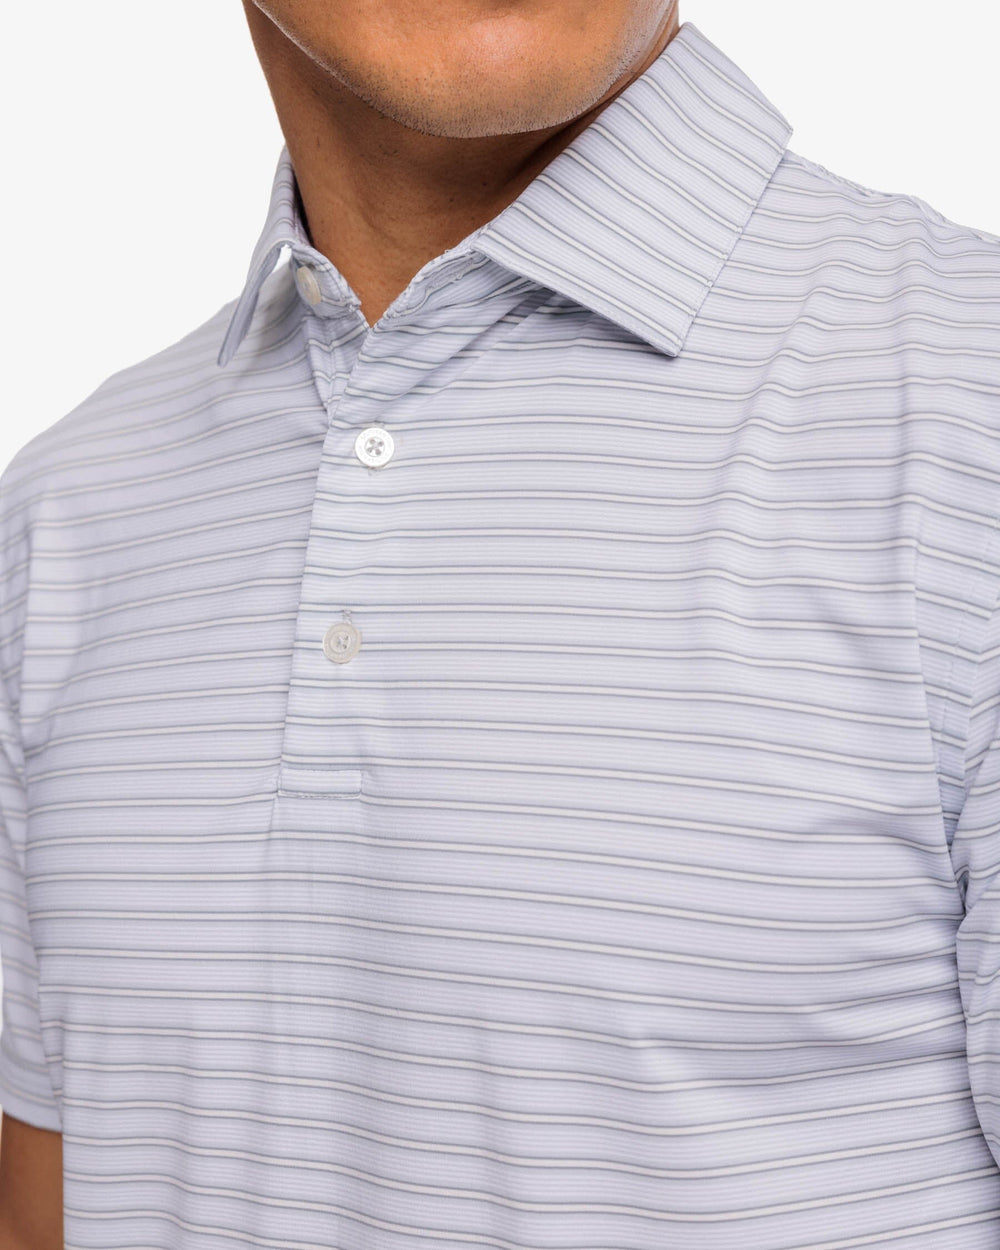 The detail view of the Southern Tide Brrreeze Crawford Stripe Performance Polo Shirt by Southern Tide - Slate Grey